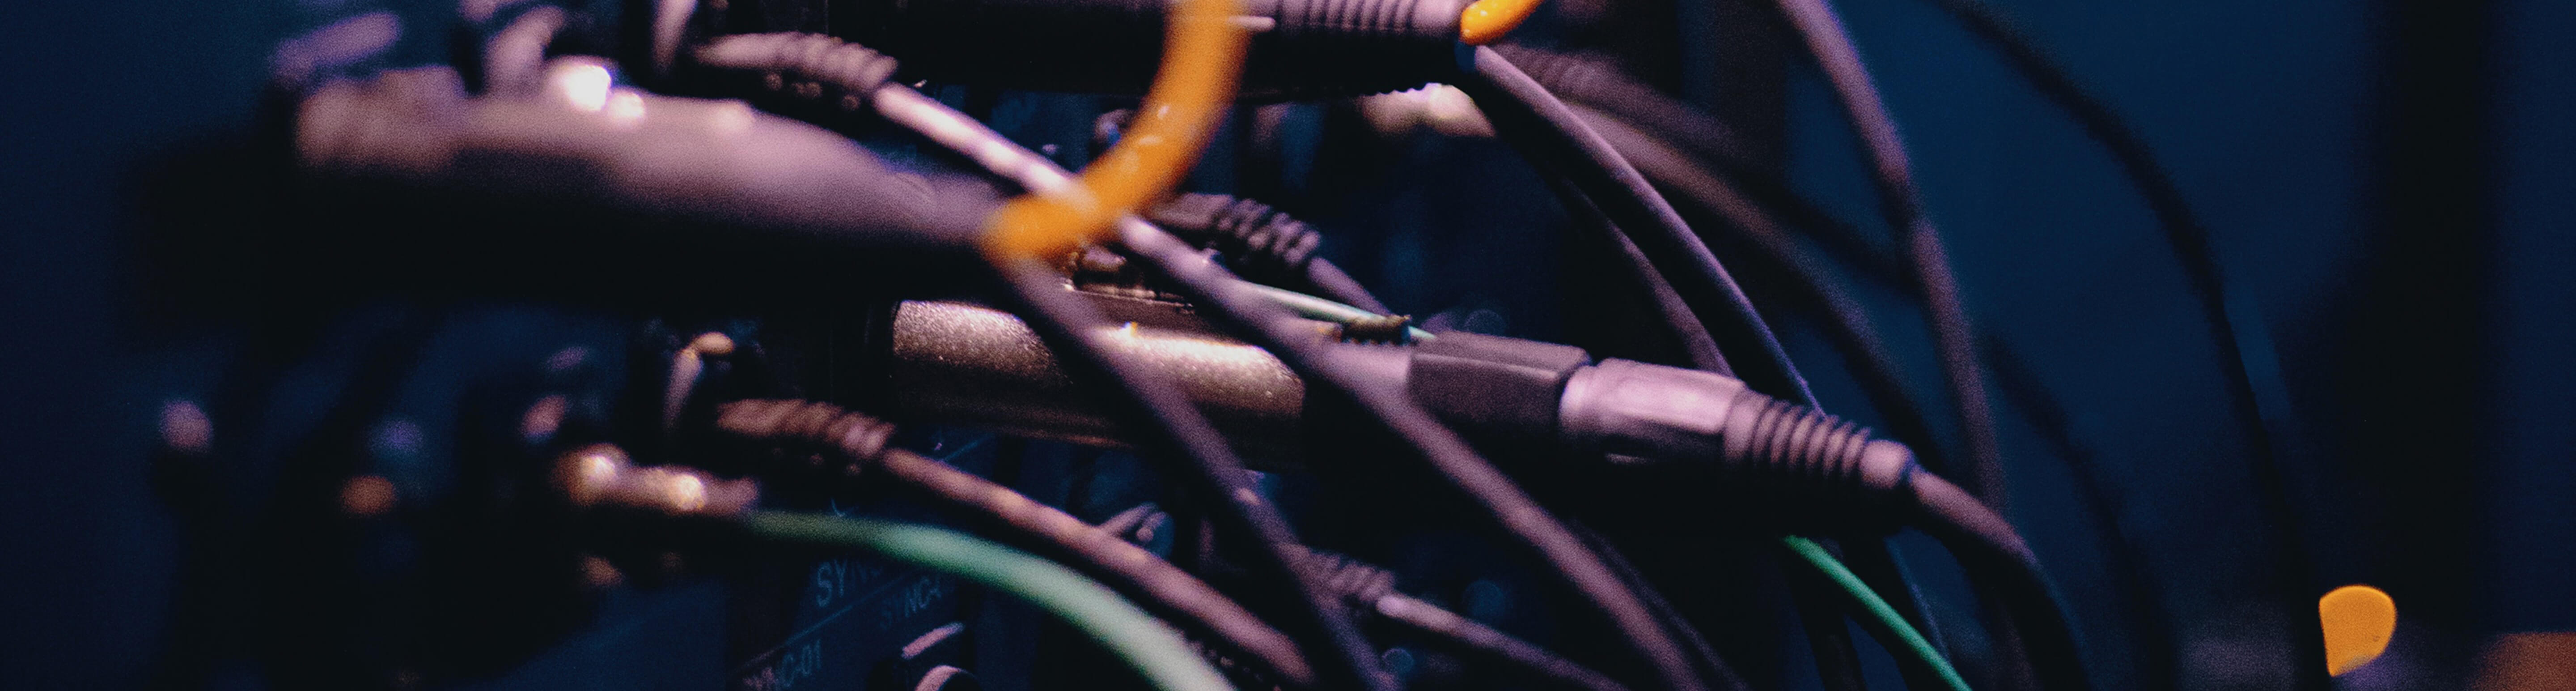 Cables in a datacentre